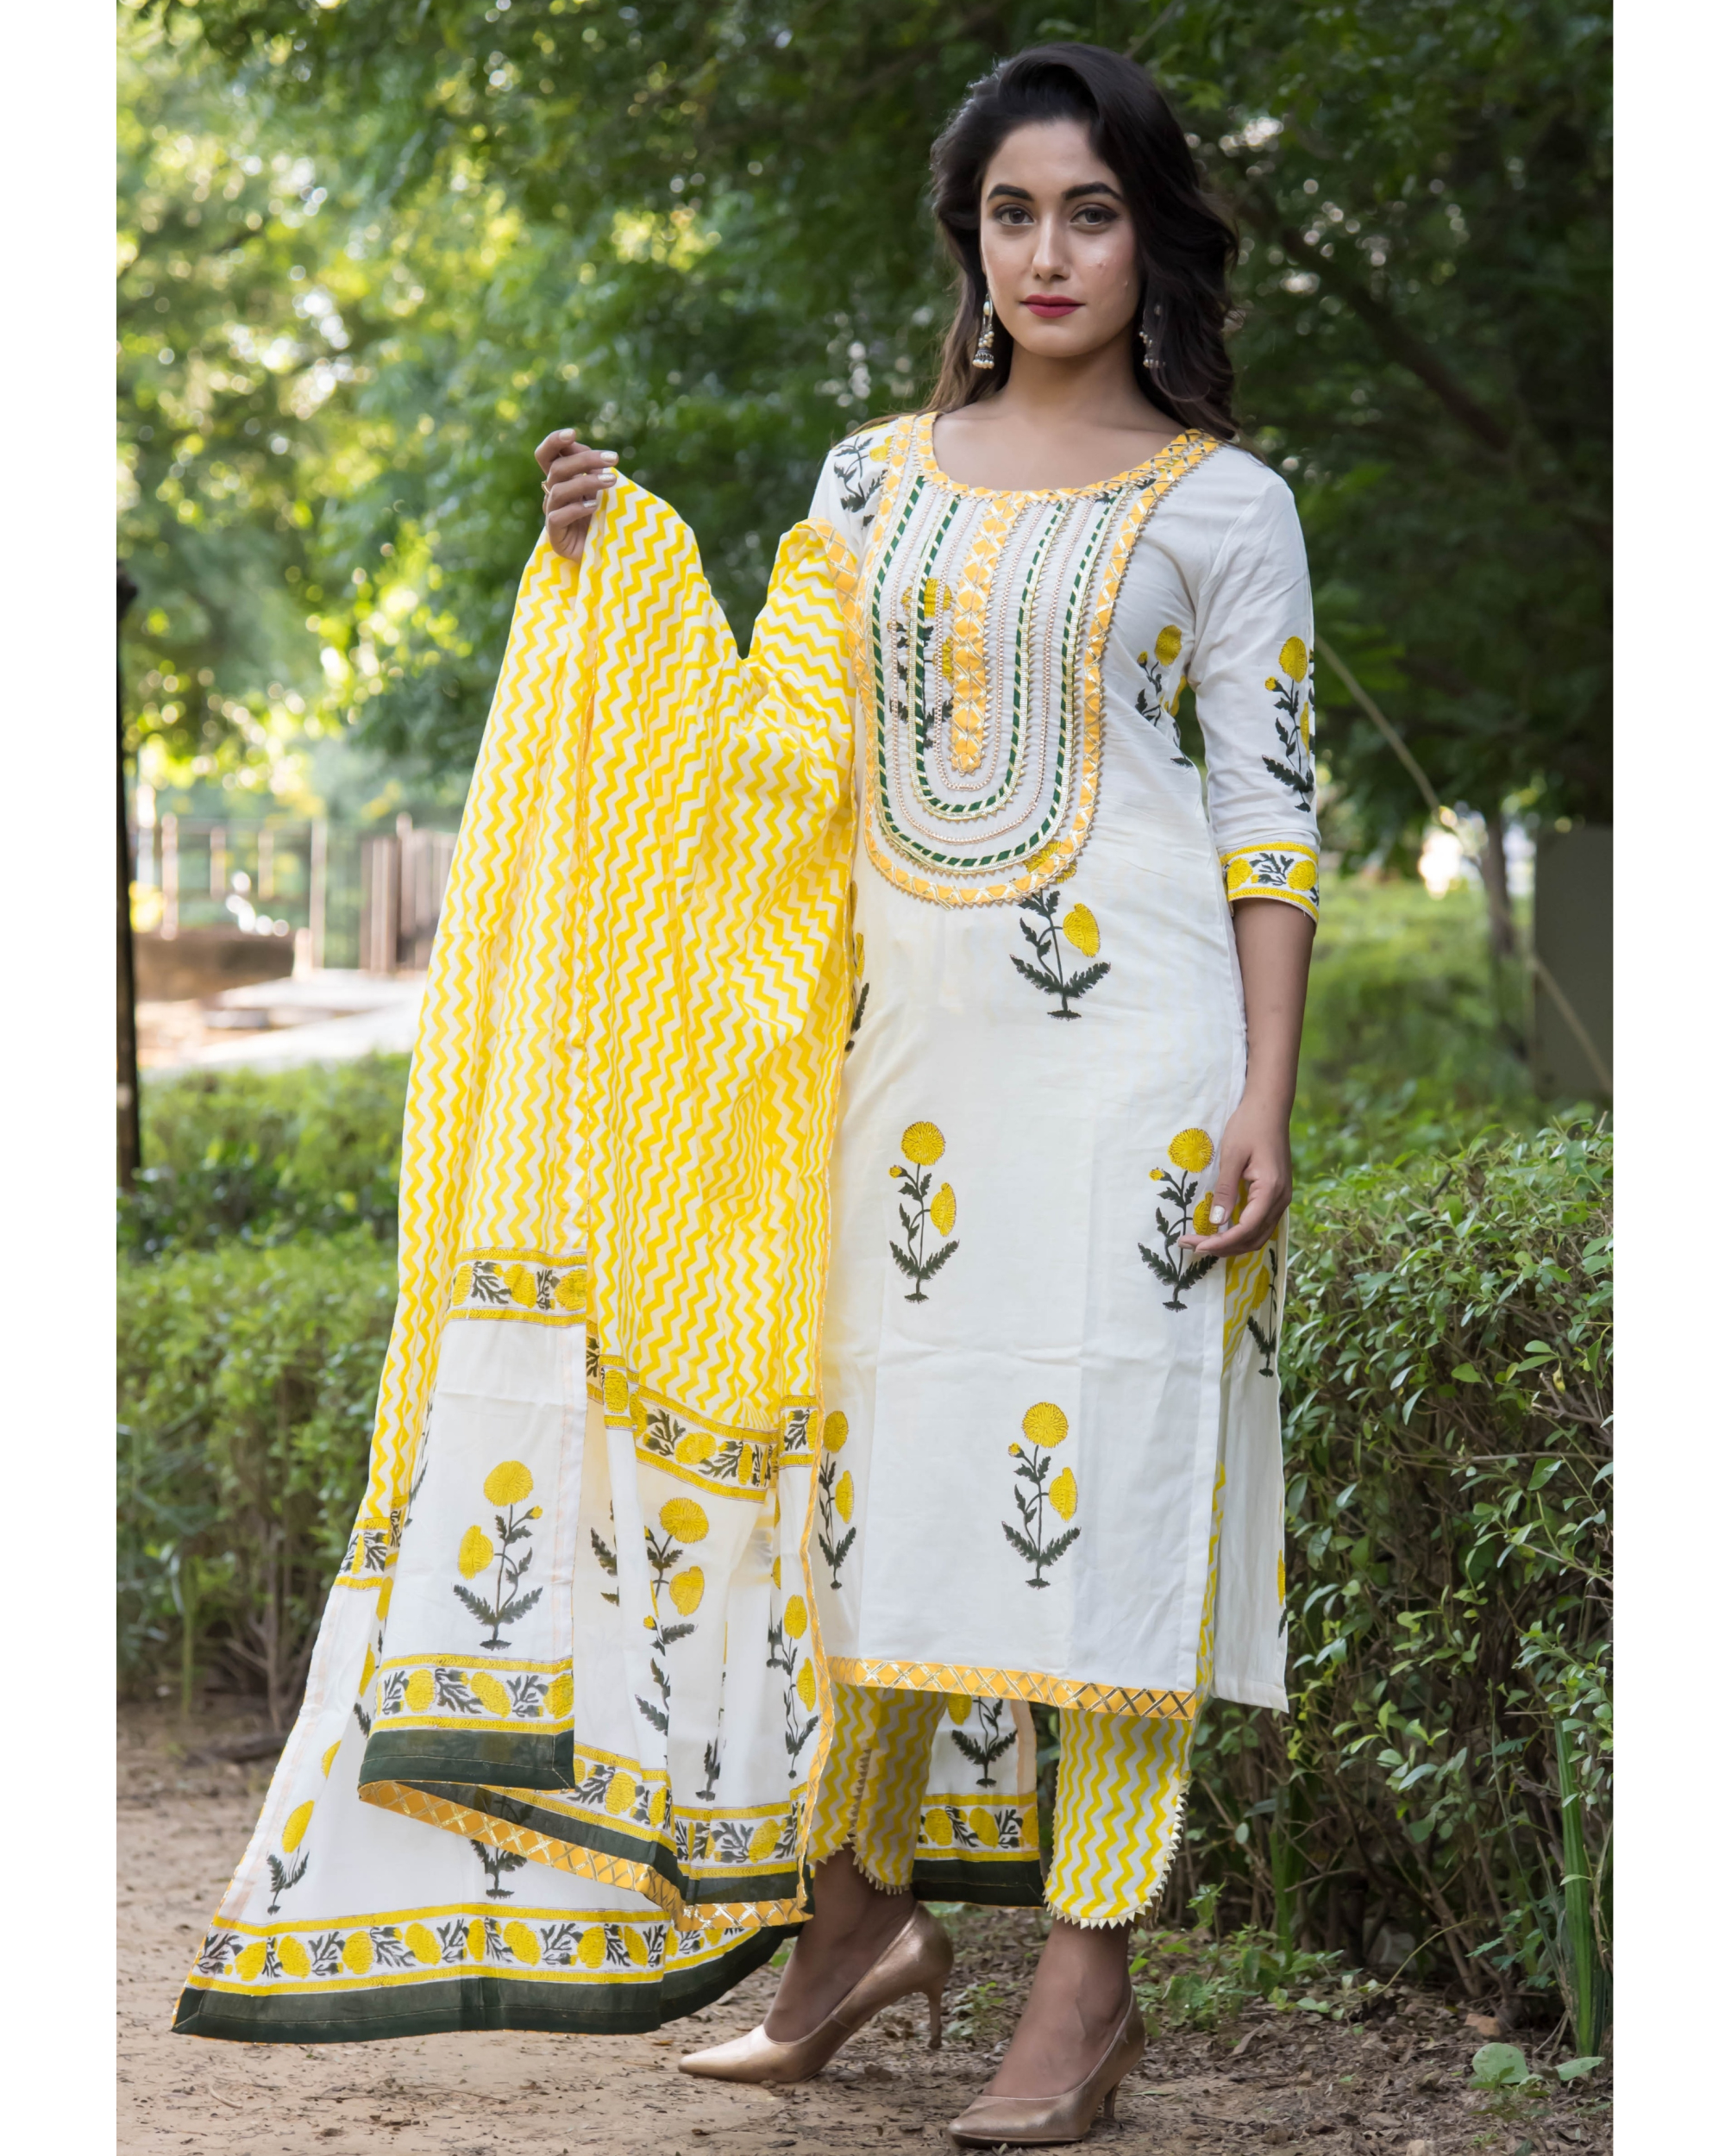 Clothing Womens Clothing Blazers & Suits Cotton Party Wear Salwar Kameez in Yellow with Gota Patti work 1736734 